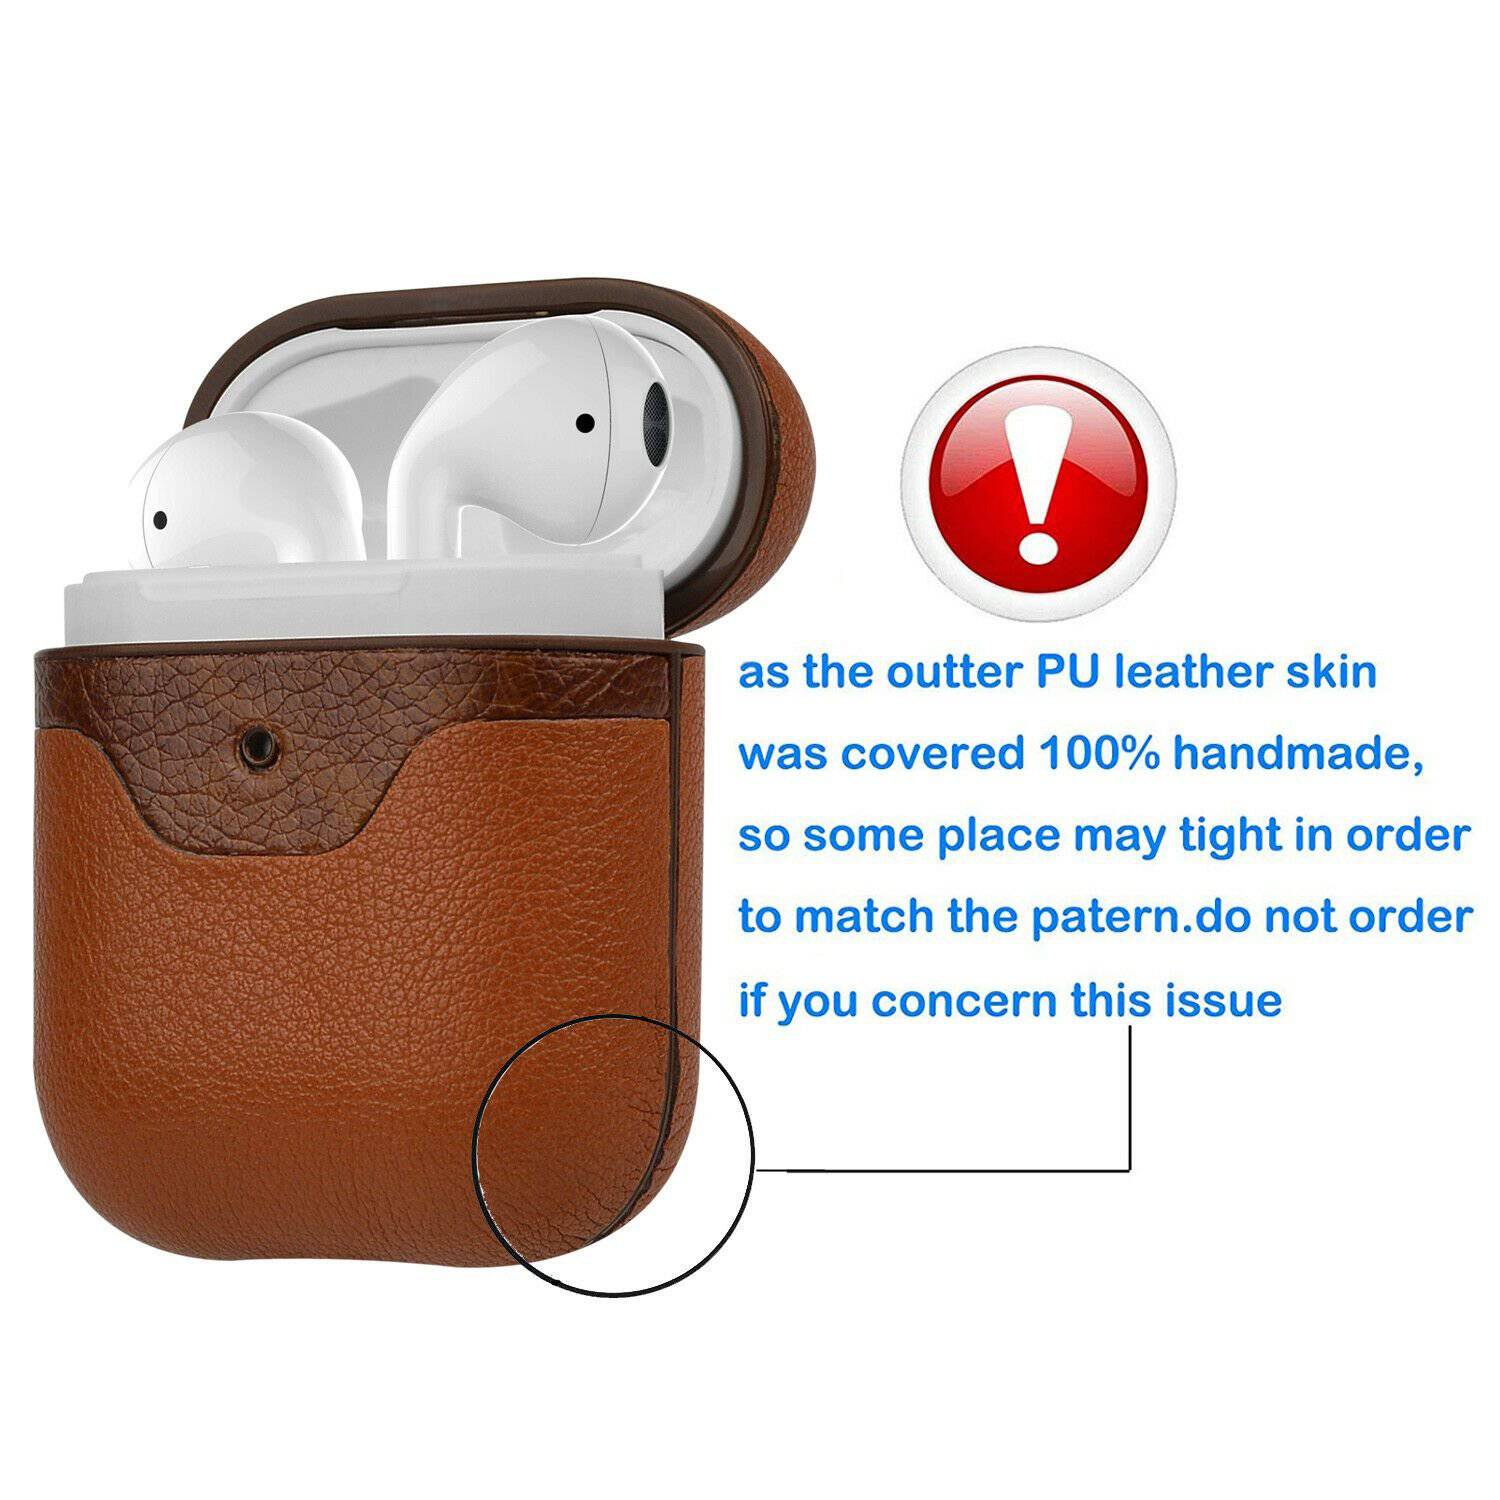 Leather Skin Case For Apple Airpods 1 2 1st 2nd Gen Earphones PU